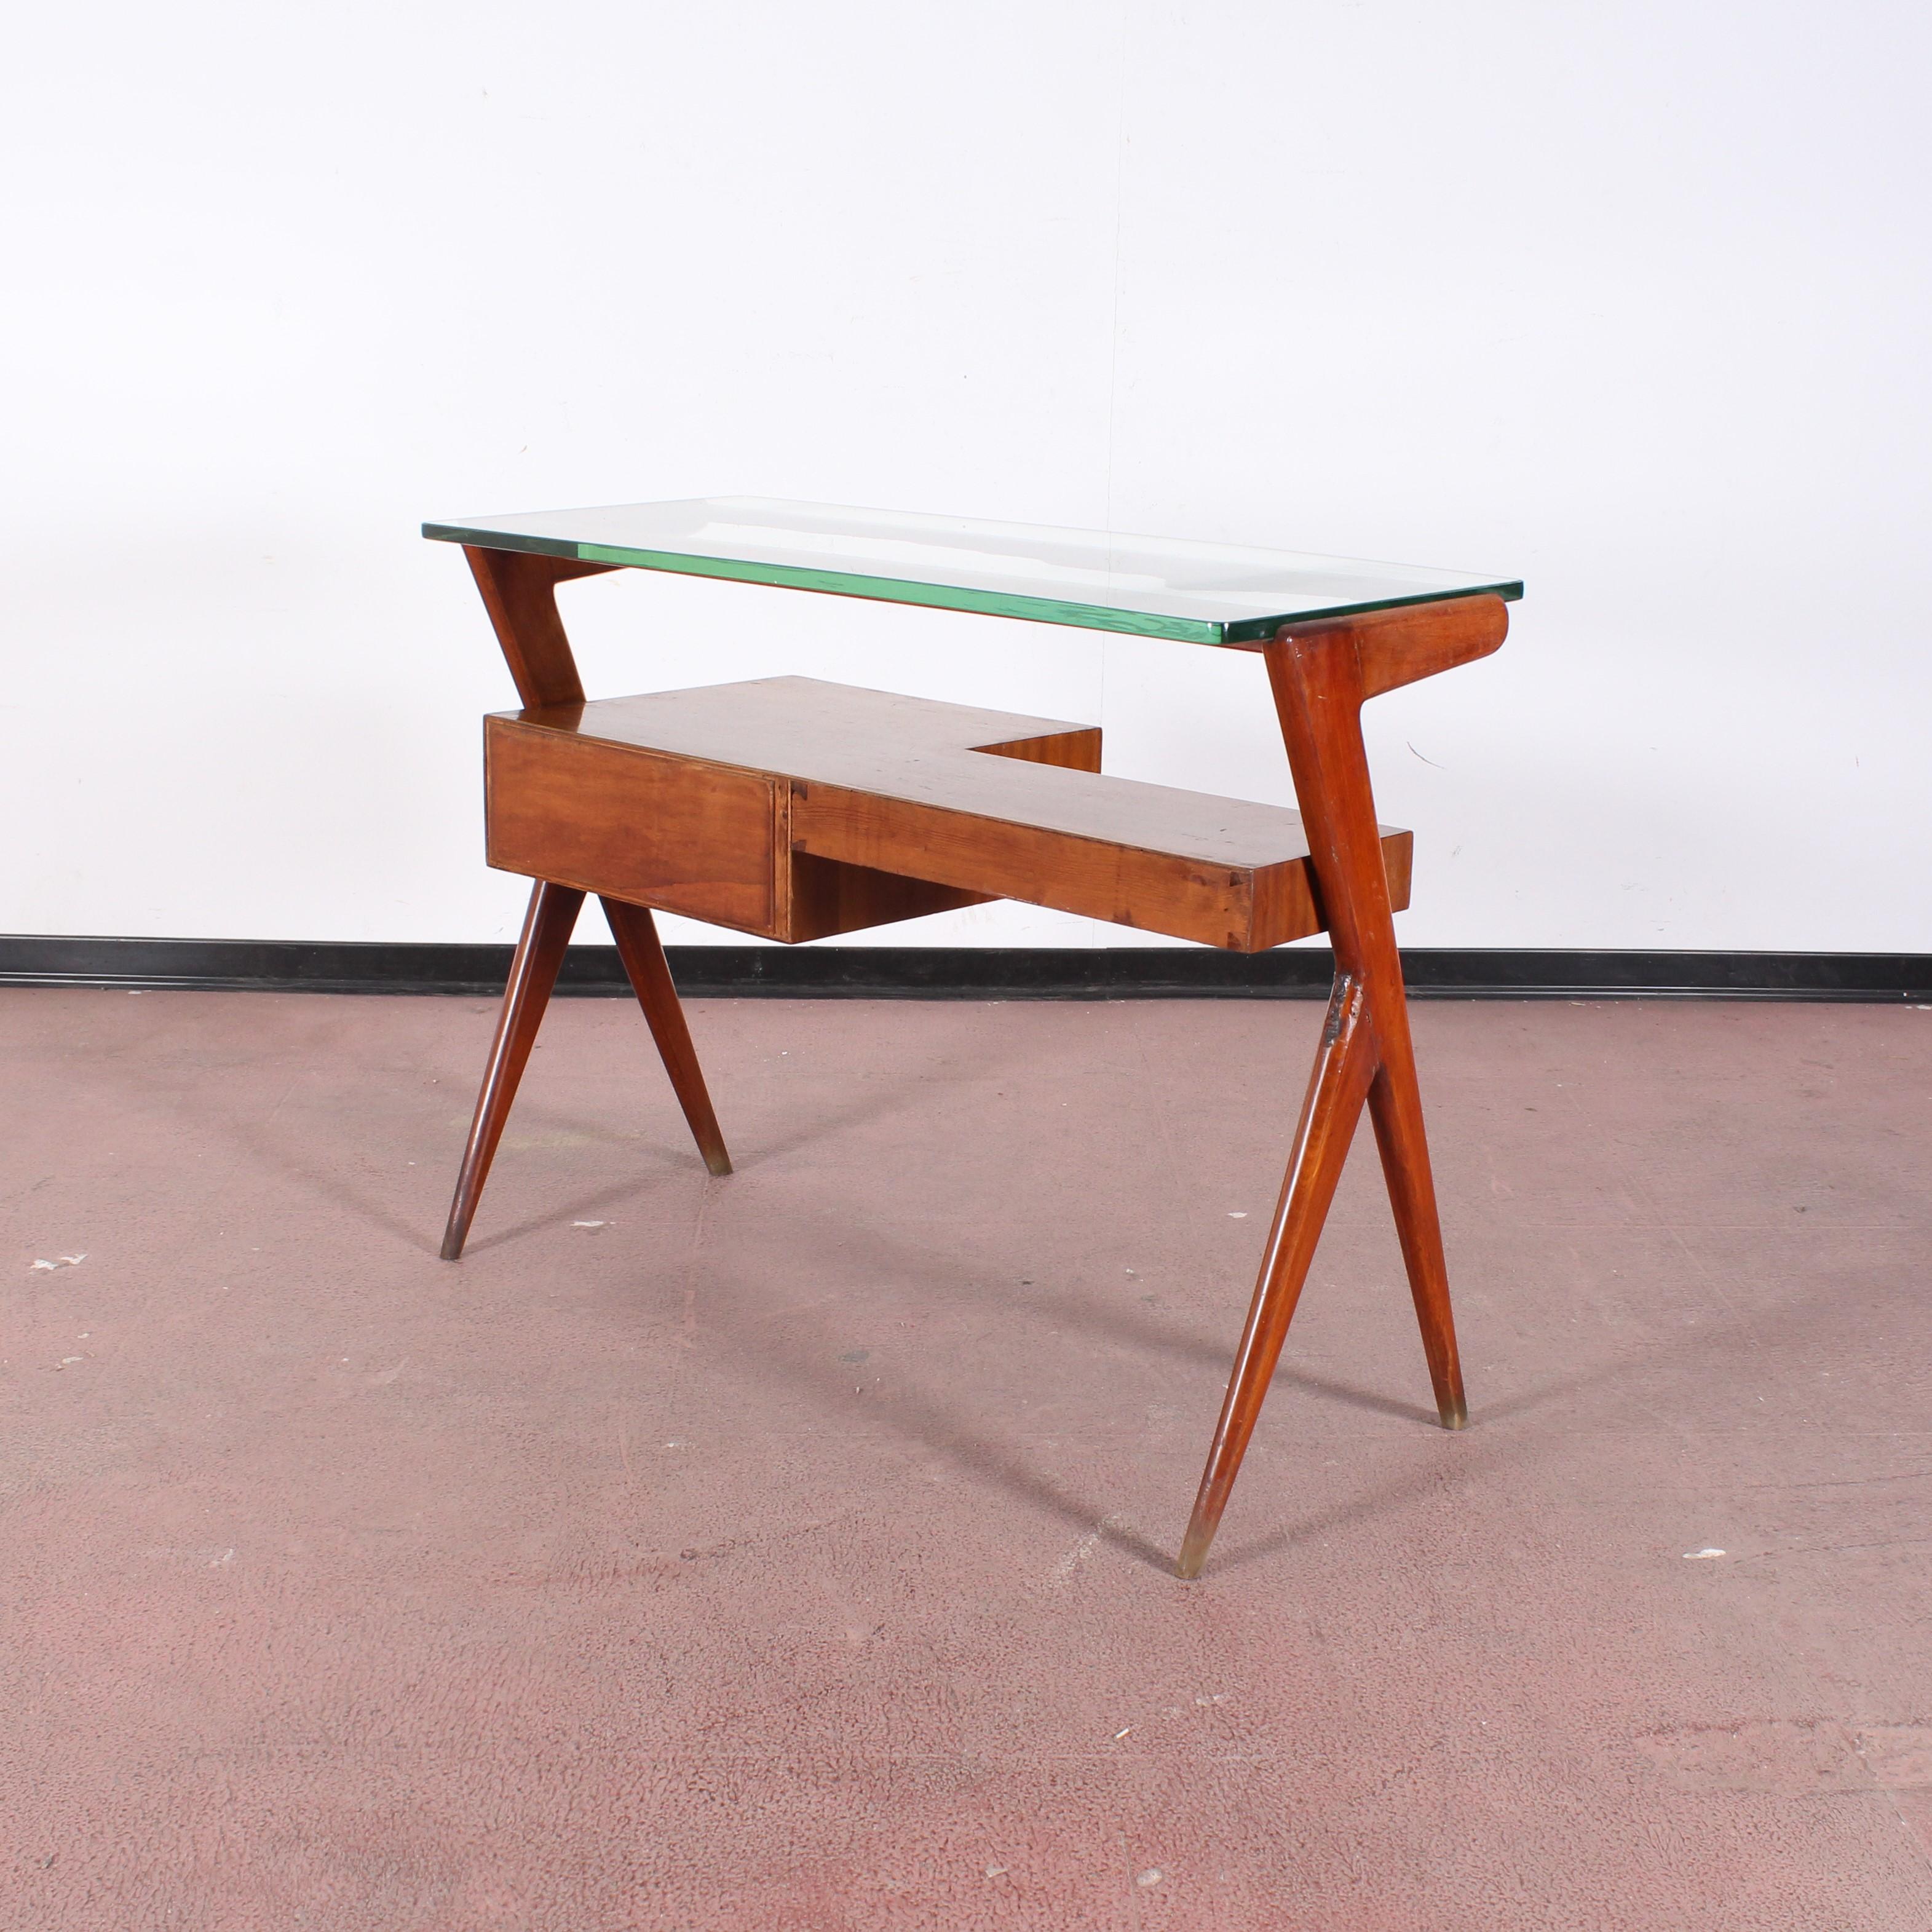 Italian I. Parisi Geometric Midcentury Small Wood and Thick Glass Desk Table Italy 1950s